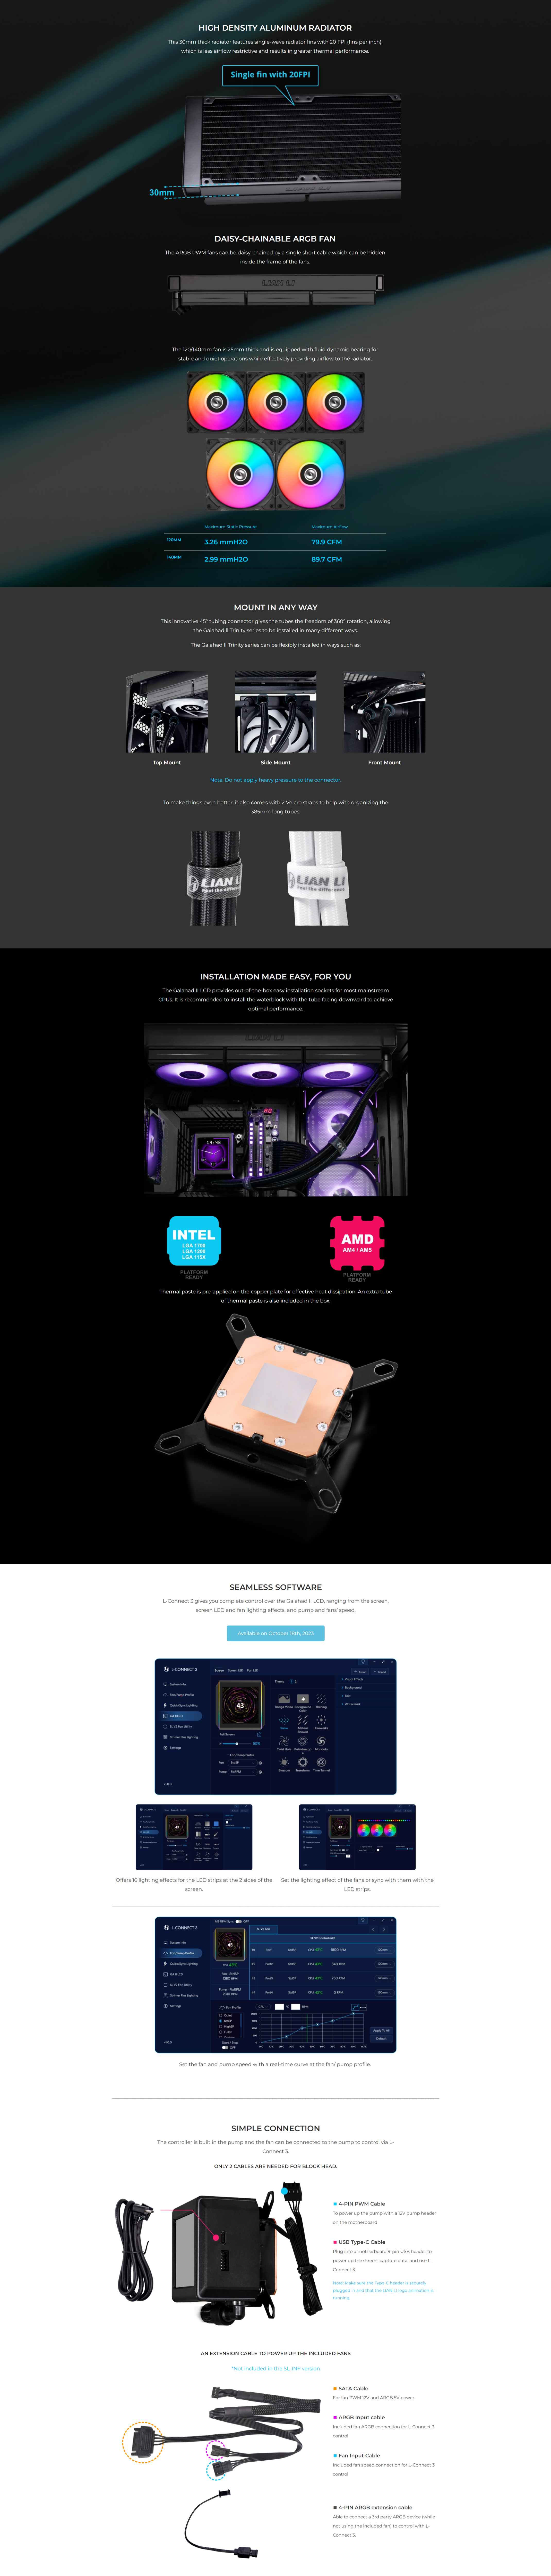 A large marketing image providing additional information about the product Lian Li Galahad II LCD SL-INF 360 RGB 360mm AIO Liquid CPU Cooler - White - Additional alt info not provided